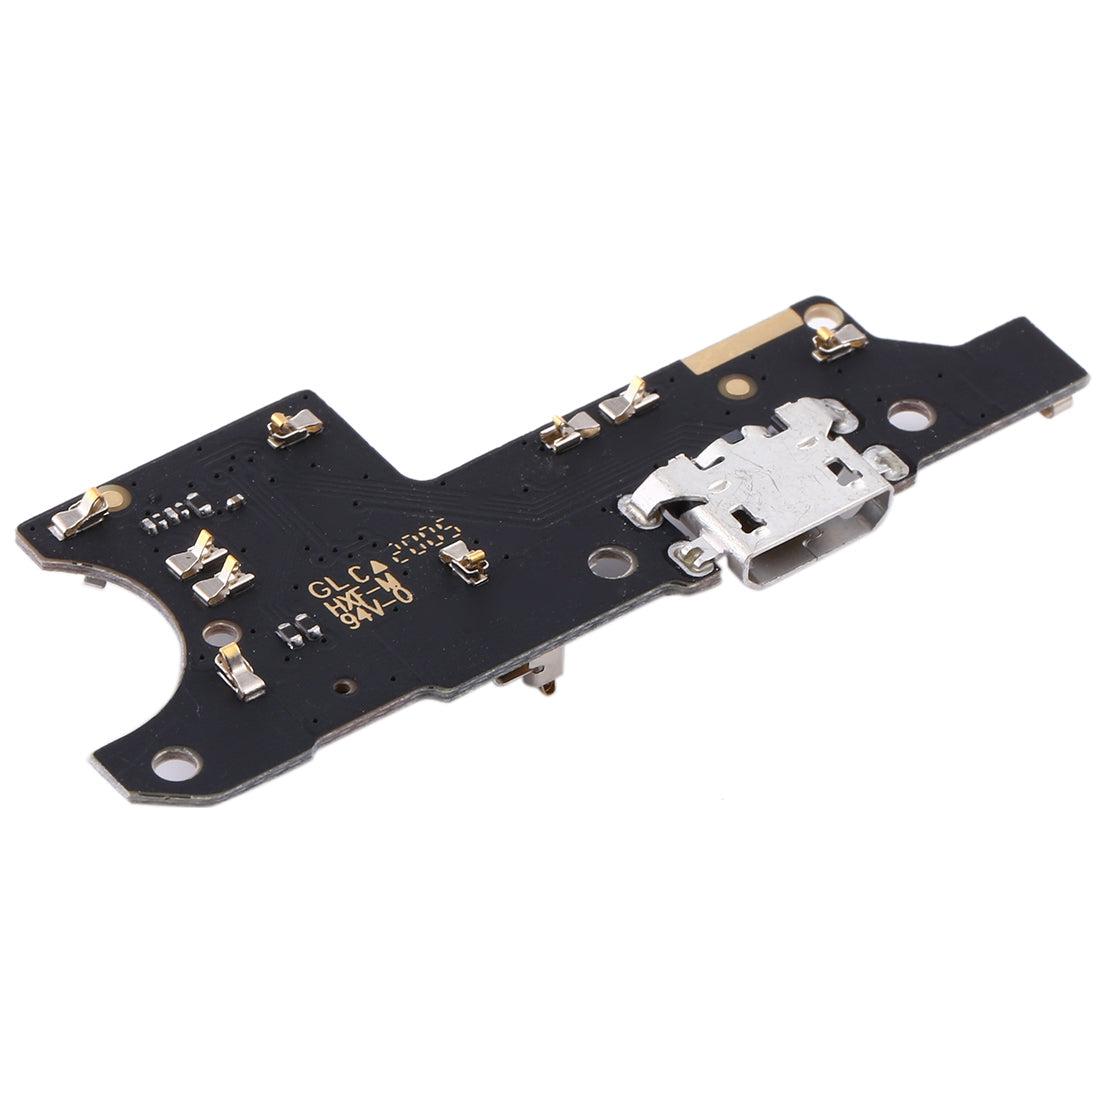 For Motorola Moto G8 Power Lite Charging Port Board Replacement-Motorola Replacement Parts-First Help Tech